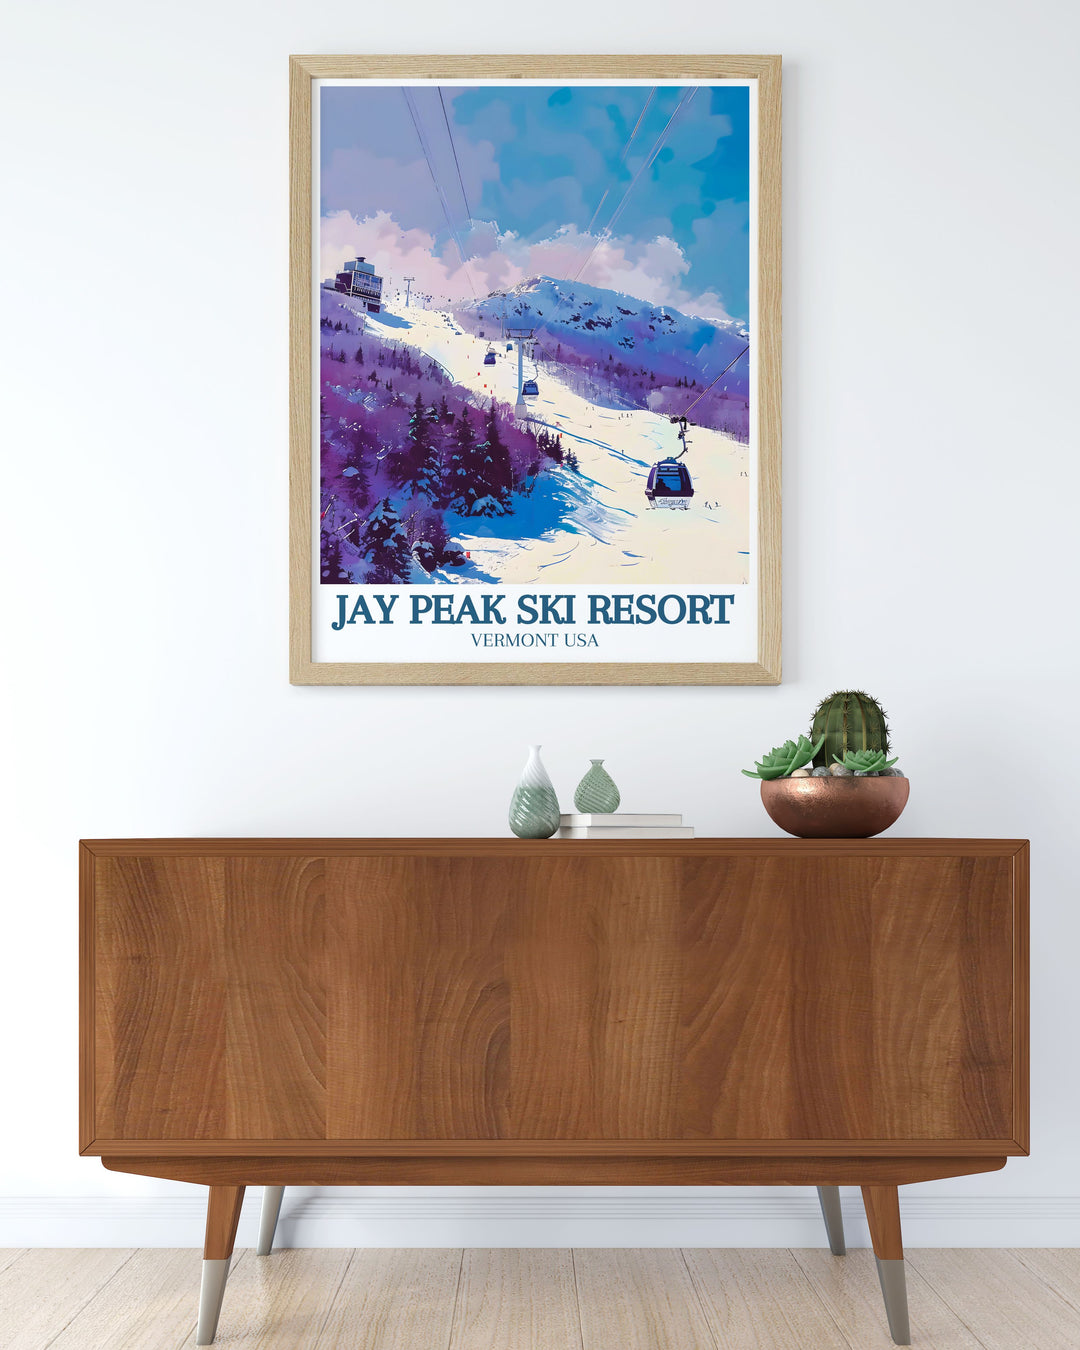 This poster highlights the unique blend of rustic charm and thrilling ski terrain at Burke Mountain, capturing the essence of New England skiing.